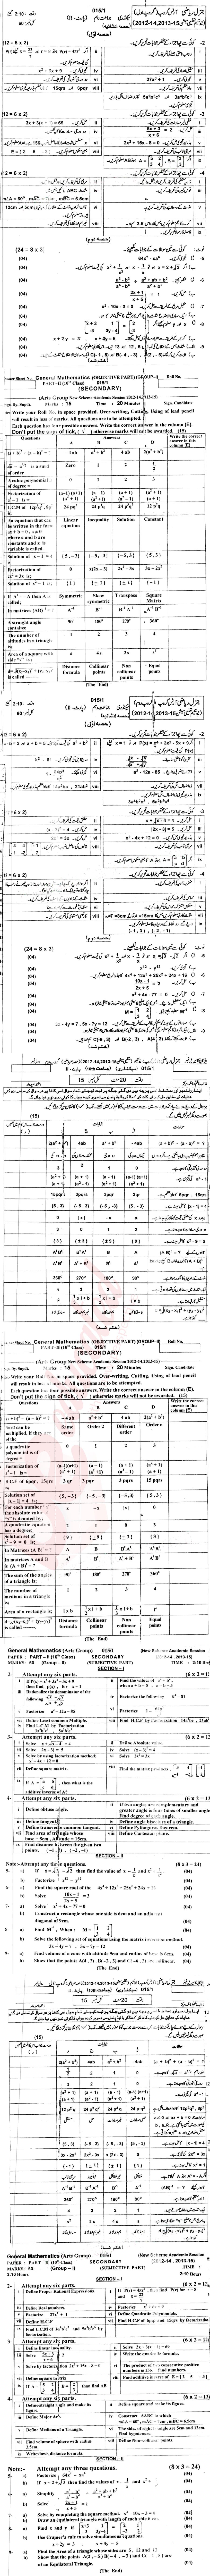 General Math 10th class Past Paper Group 1 BISE AJK 2015